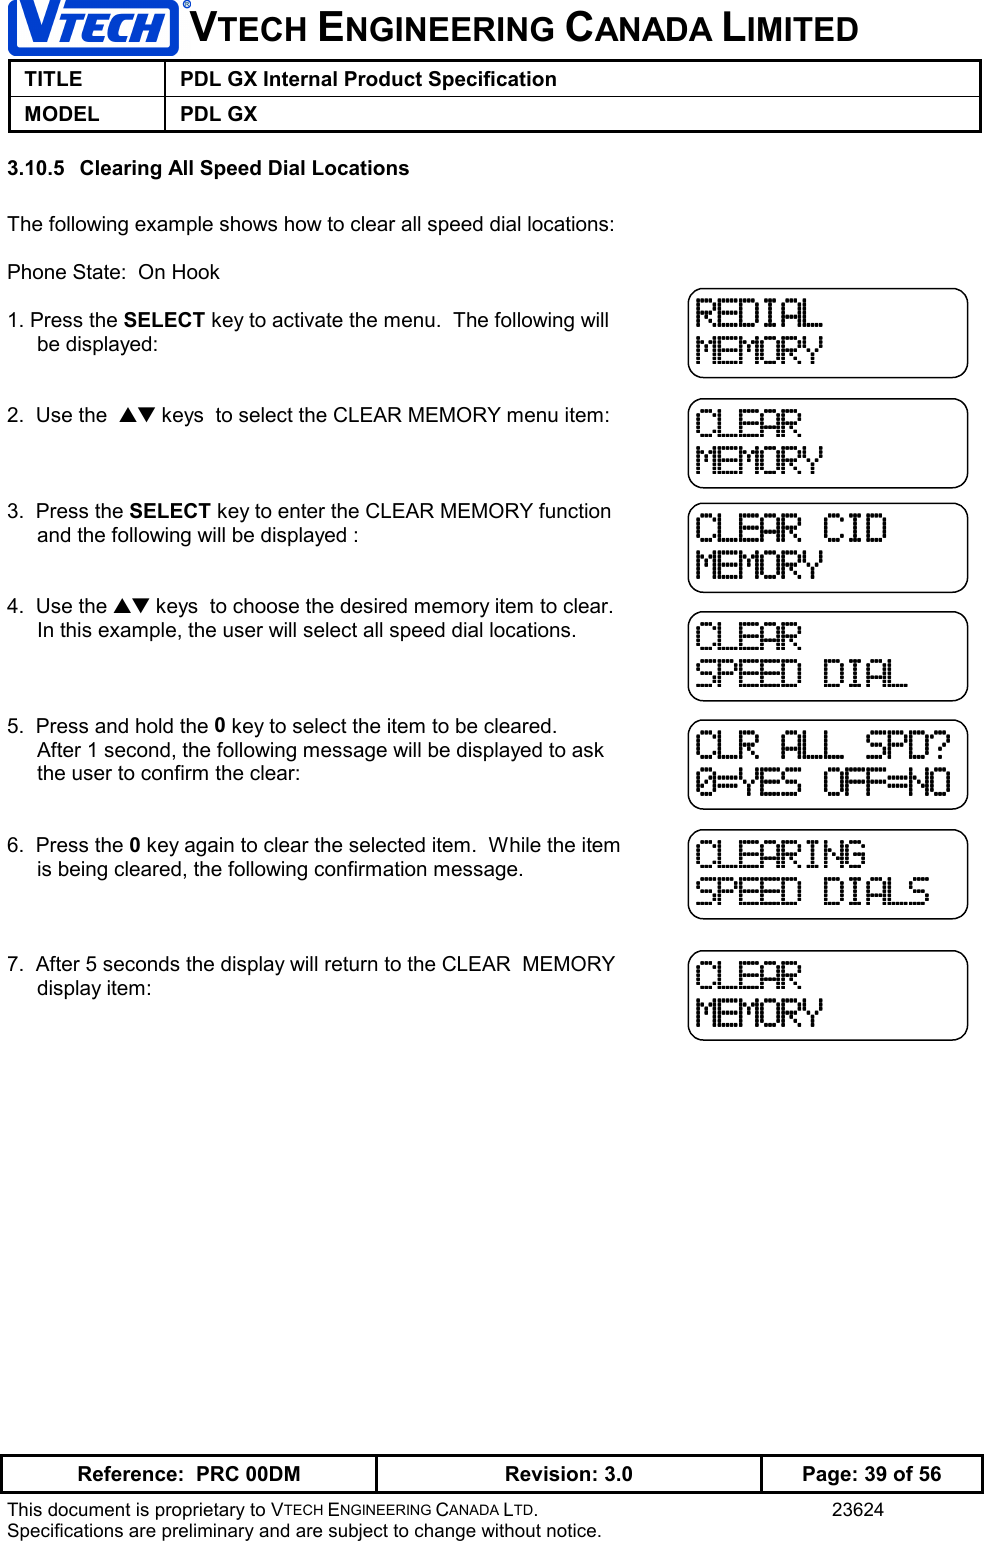 VTECH ENGINEERING CANADA LIMITEDTITLE PDL GX Internal Product SpecificationMODEL PDL GXReference:  PRC 00DM Revision: 3.0 Page: 39 of 56This document is proprietary to VTECH ENGINEERING CANADA LTD. 23624Specifications are preliminary and are subject to change without notice.3.10.5  Clearing All Speed Dial LocationsThe following example shows how to clear all speed dial locations:Phone State:  On Hook1. Press the SELECT key to activate the menu.  The following willbe displayed:2.  Use the  ▲▼ keys  to select the CLEAR MEMORY menu item:3.  Press the SELECT key to enter the CLEAR MEMORY functionand the following will be displayed :4.  Use the ▲▼ keys  to choose the desired memory item to clear.In this example, the user will select all speed dial locations.5.  Press and hold the 0 key to select the item to be cleared.After 1 second, the following message will be displayed to askthe user to confirm the clear:6.  Press the 0 key again to clear the selected item.  While the itemis being cleared, the following confirmation message.7.  After 5 seconds the display will return to the CLEAR  MEMORYdisplay item:REDIALREDIALREDIALREDIALMEMORYMEMORYMEMORYMEMORYCLEARCLEARCLEARCLEARMEMORYMEMORYMEMORYMEMORYCLEAR CIDCLEAR CIDCLEAR CIDCLEAR CIDMEMORYMEMORYMEMORYMEMORYCLEARCLEARCLEARCLEARSPEED DIALSPEED DIALSPEED DIALSPEED DIALCLR ALL SPD?CLR ALL SPD?CLR ALL SPD?CLR ALL SPD?0=YES OFF=NO0=YES OFF=NO0=YES OFF=NO0=YES OFF=NOCLEARINGCLEARINGCLEARINGCLEARINGSPEED DIALSSPEED DIALSSPEED DIALSSPEED DIALSCLEARCLEARCLEARCLEARMEMORYMEMORYMEMORYMEMORY